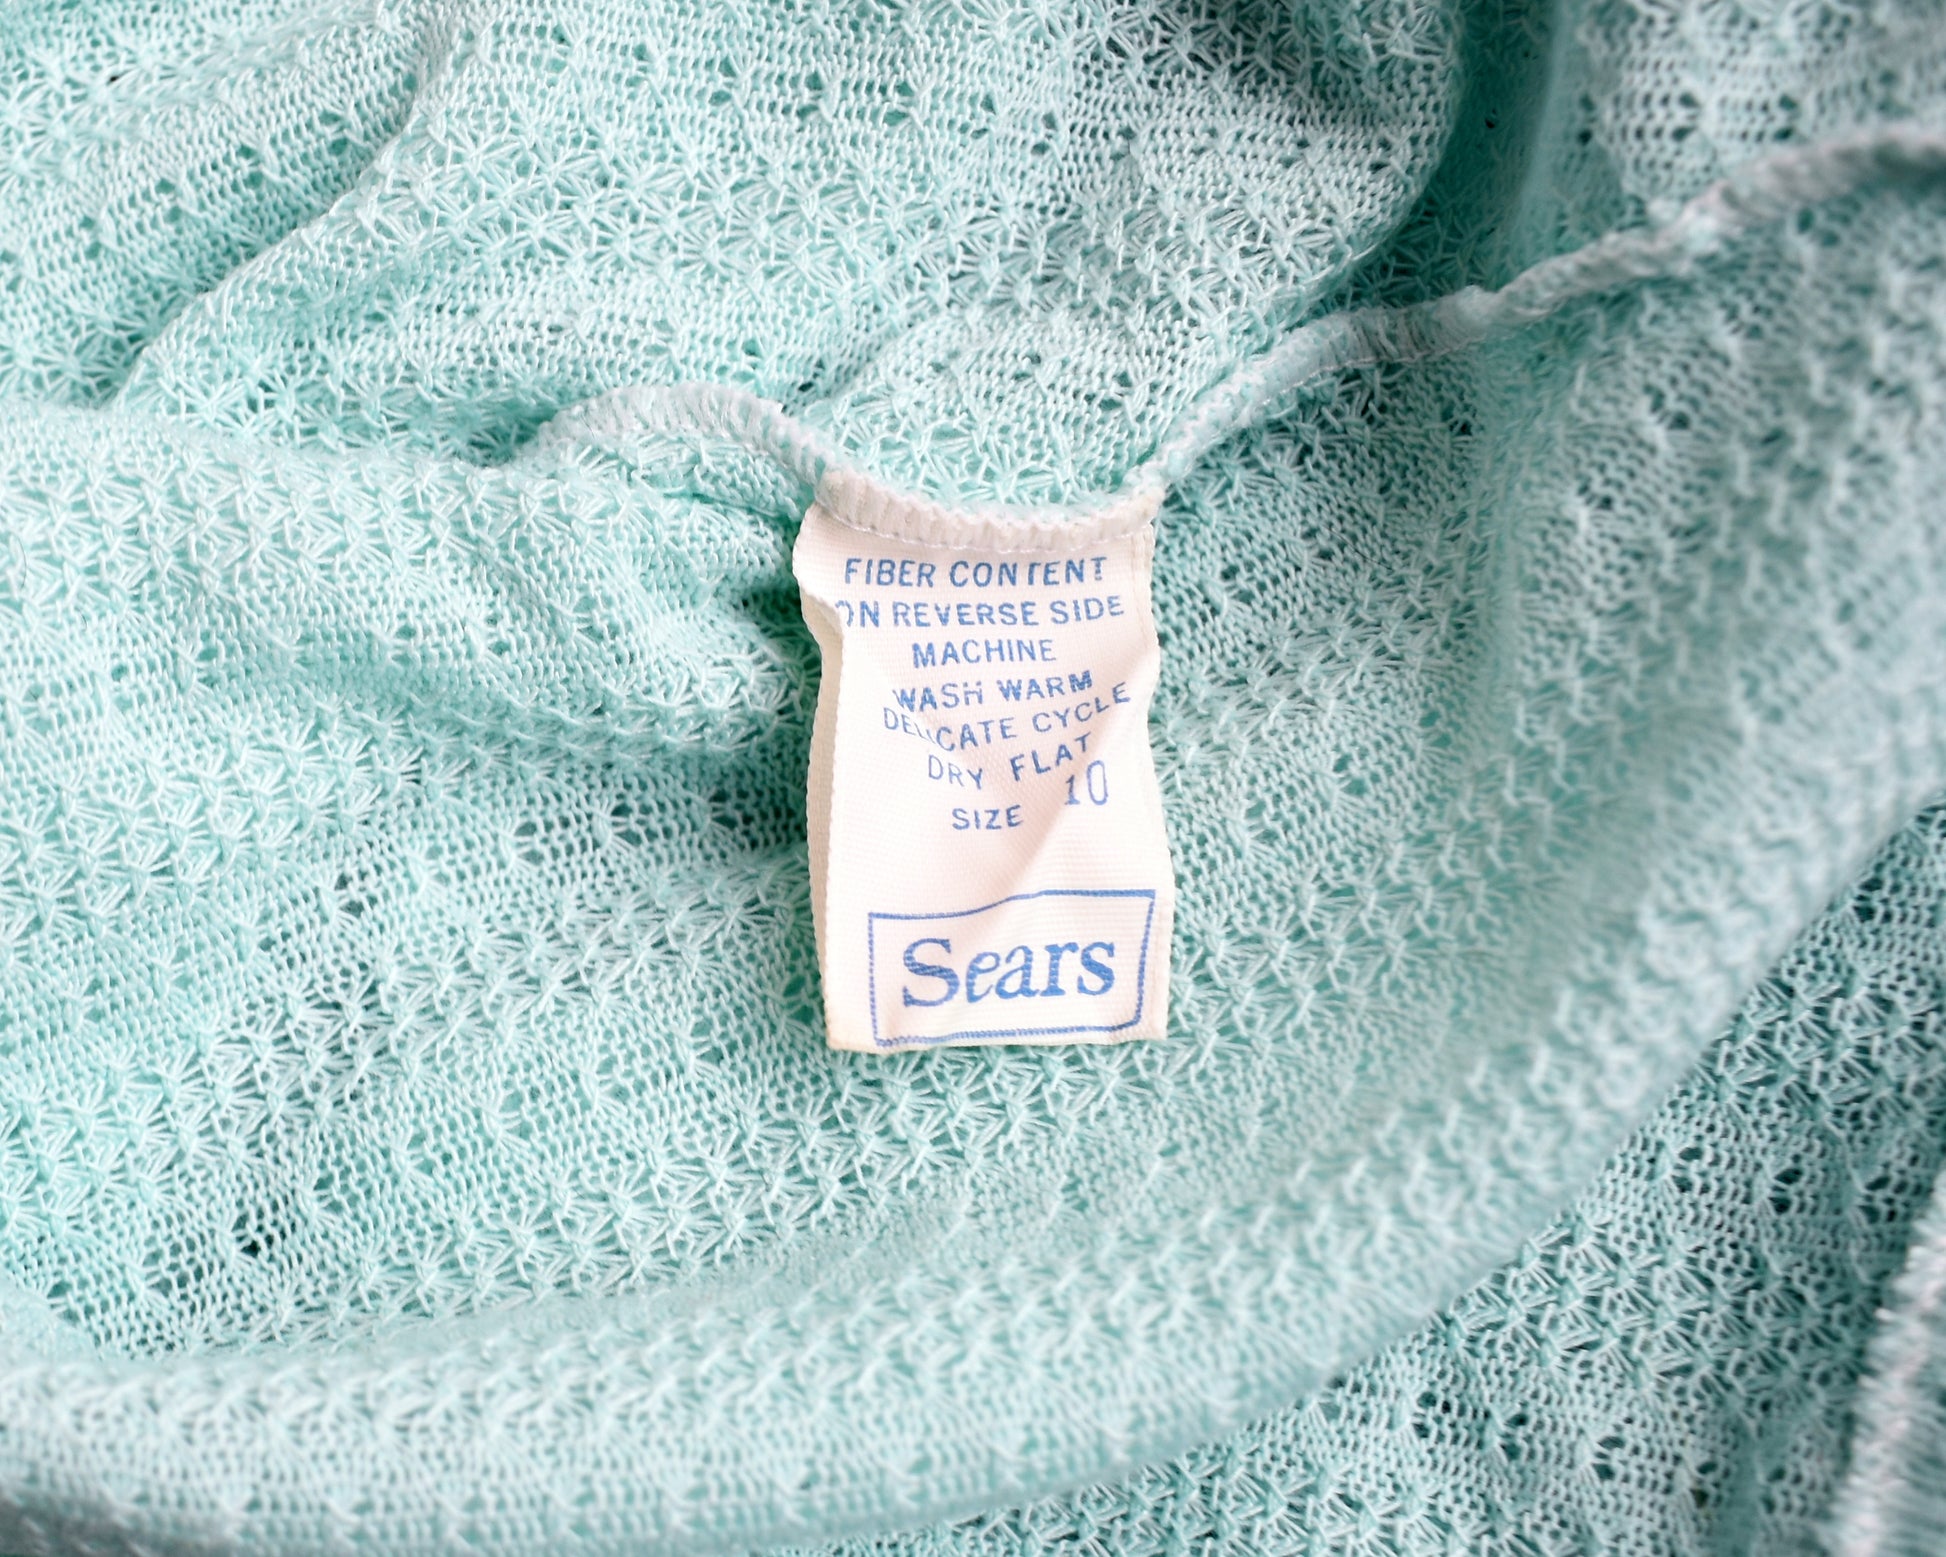 Close up of the tag on the bed jacket which says Sears